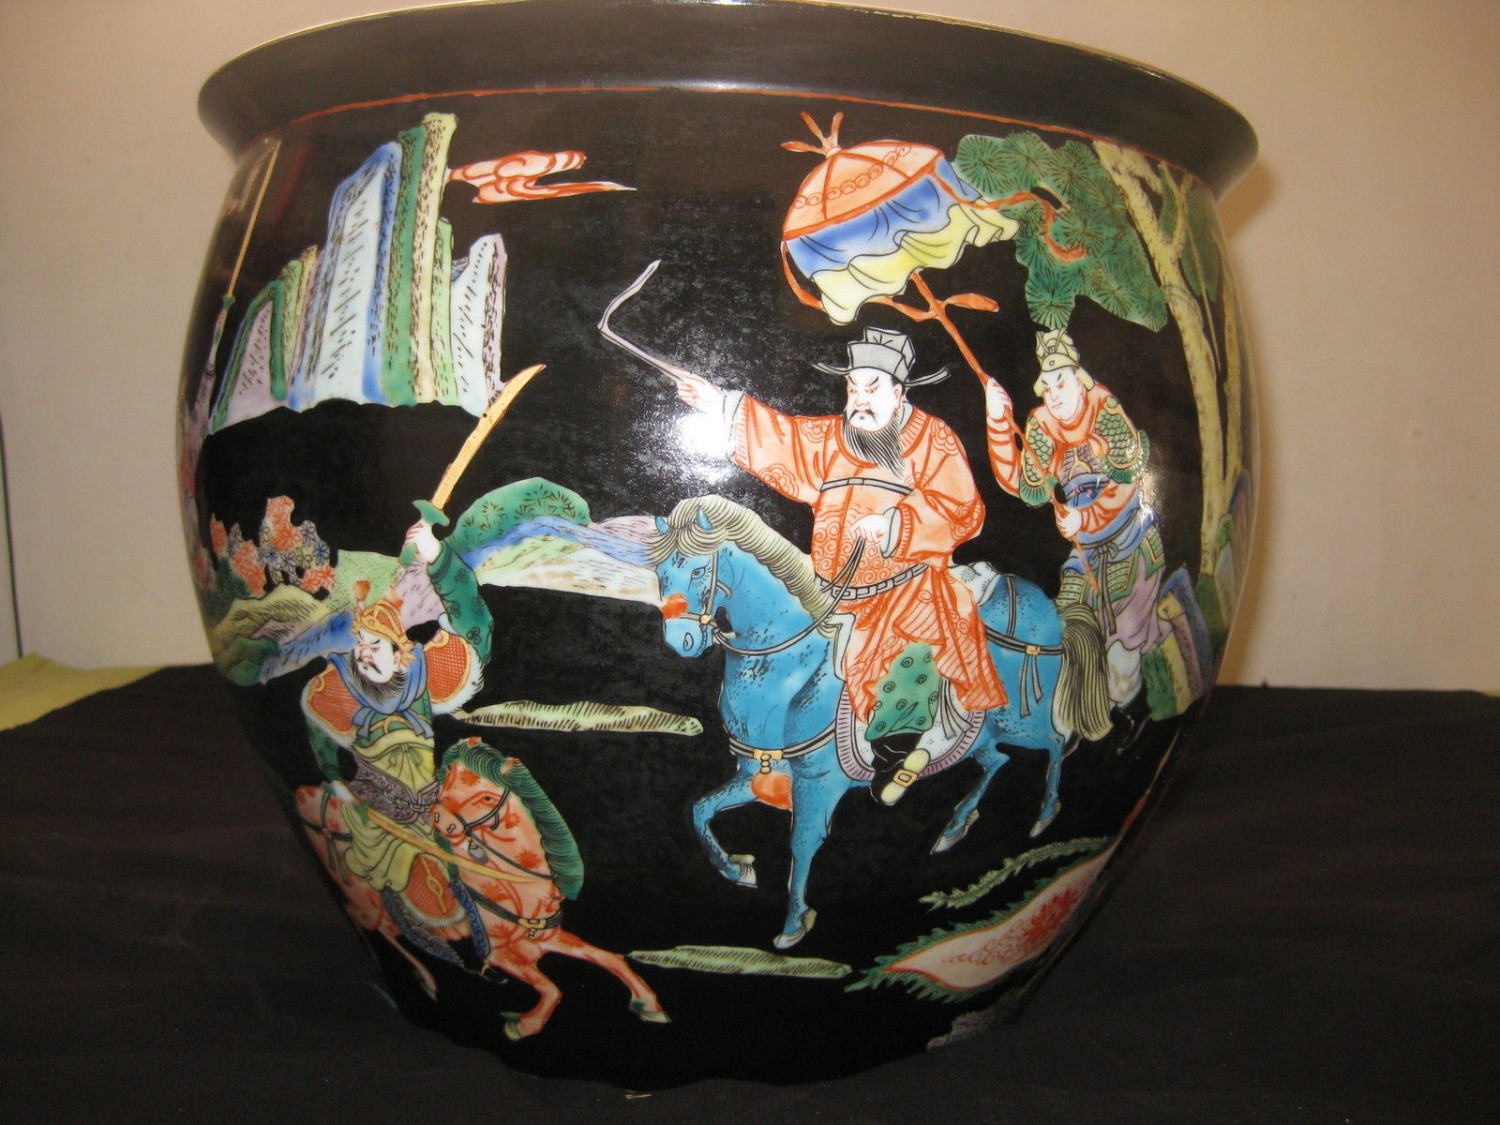 ANTIQUE HUGE CHINESE PORCELAIN FISH BOWL,19TH CENTURY, NR.